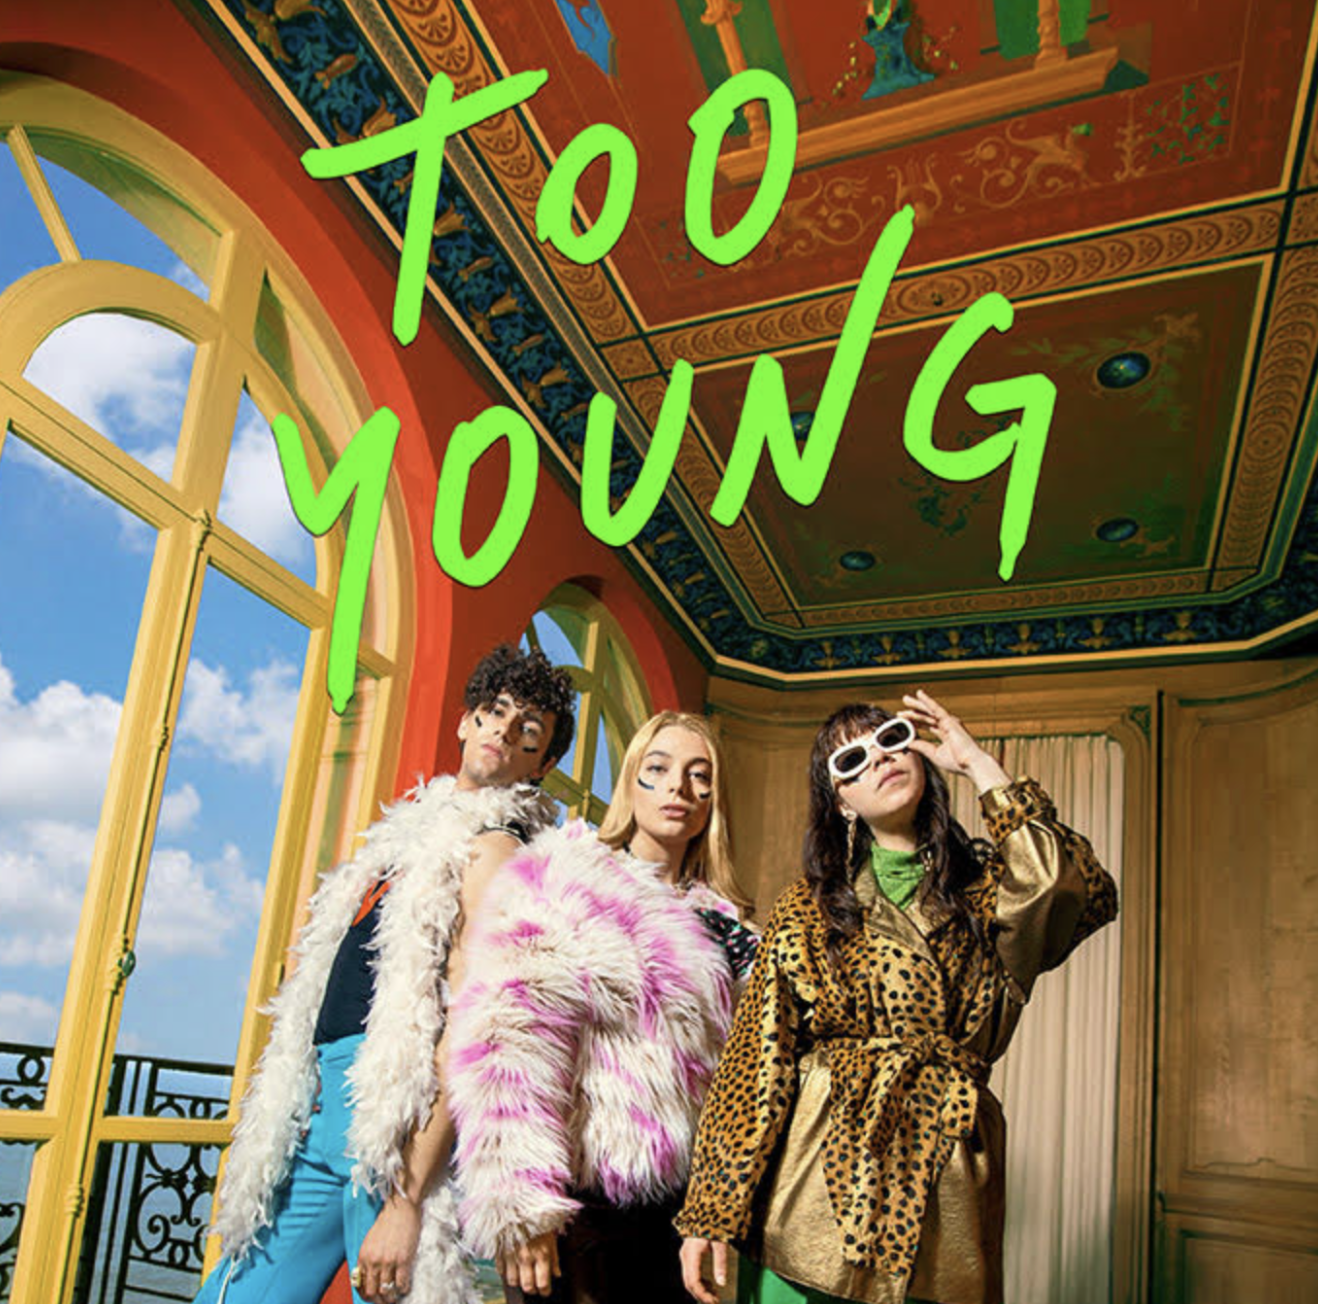 Hyphen hyphen - too young -